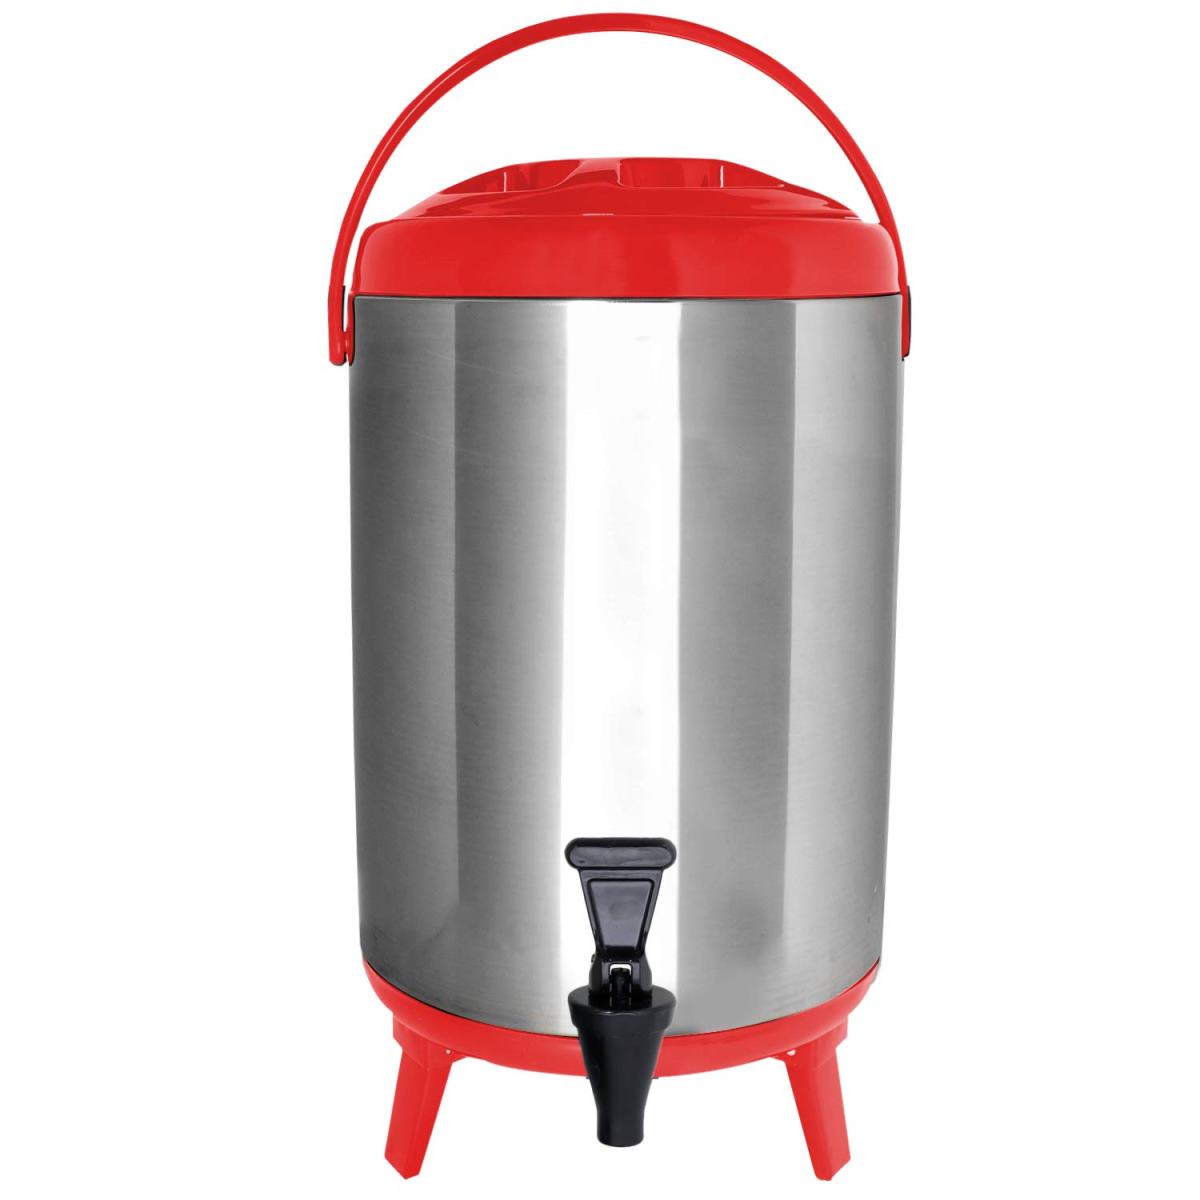 Vollum Stainless Steel Insulated Hot and Cold Beverage Dispenser - 8 Liter, Red, Used Great Condition